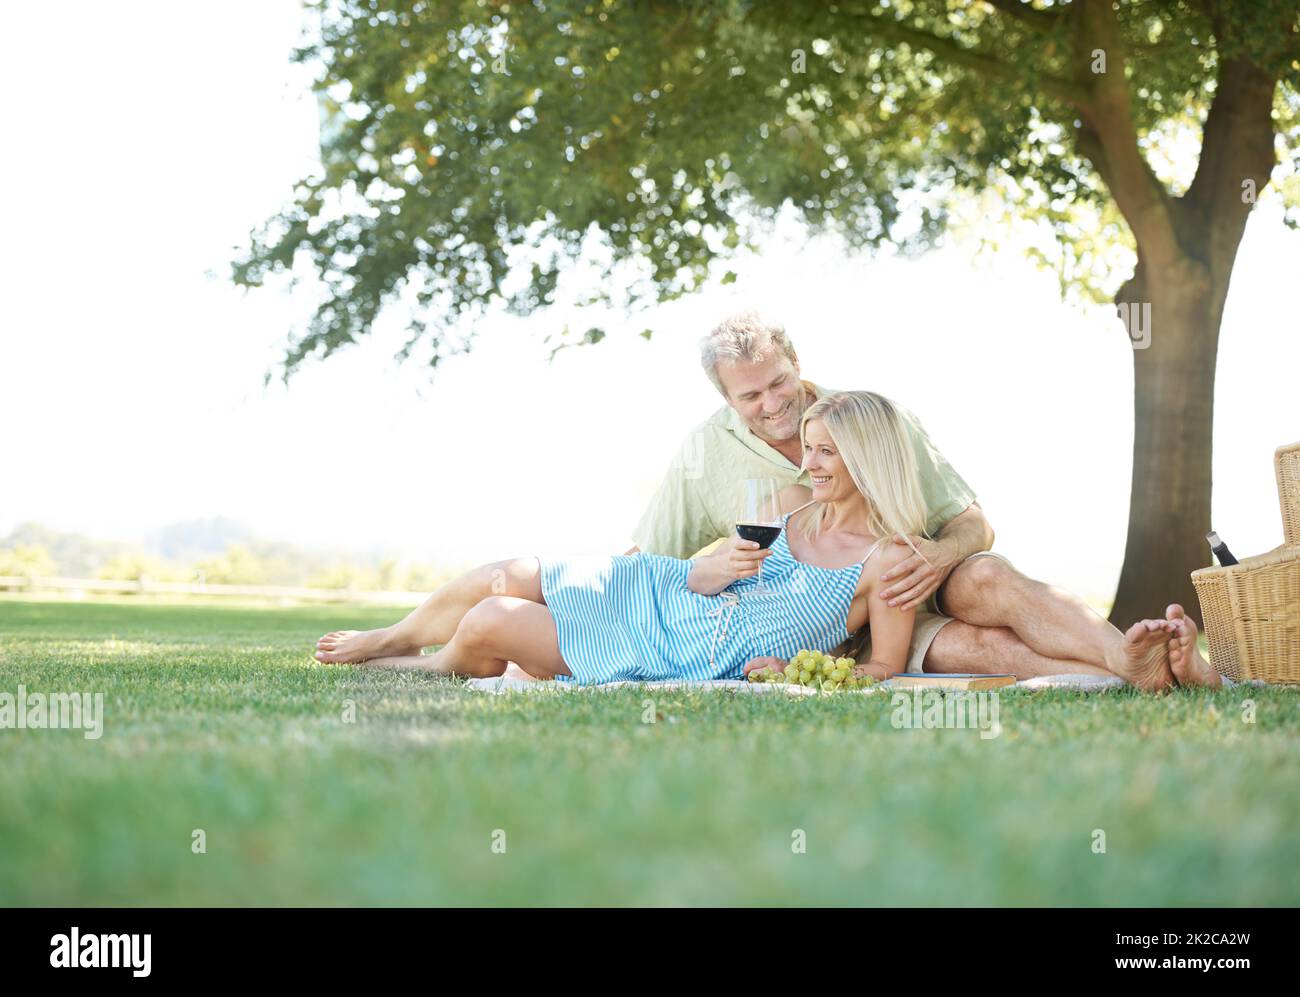 Not even the view compares to your beauty. A smiling husband and wife enjoying a leisurely picnic in the park. Stock Photo